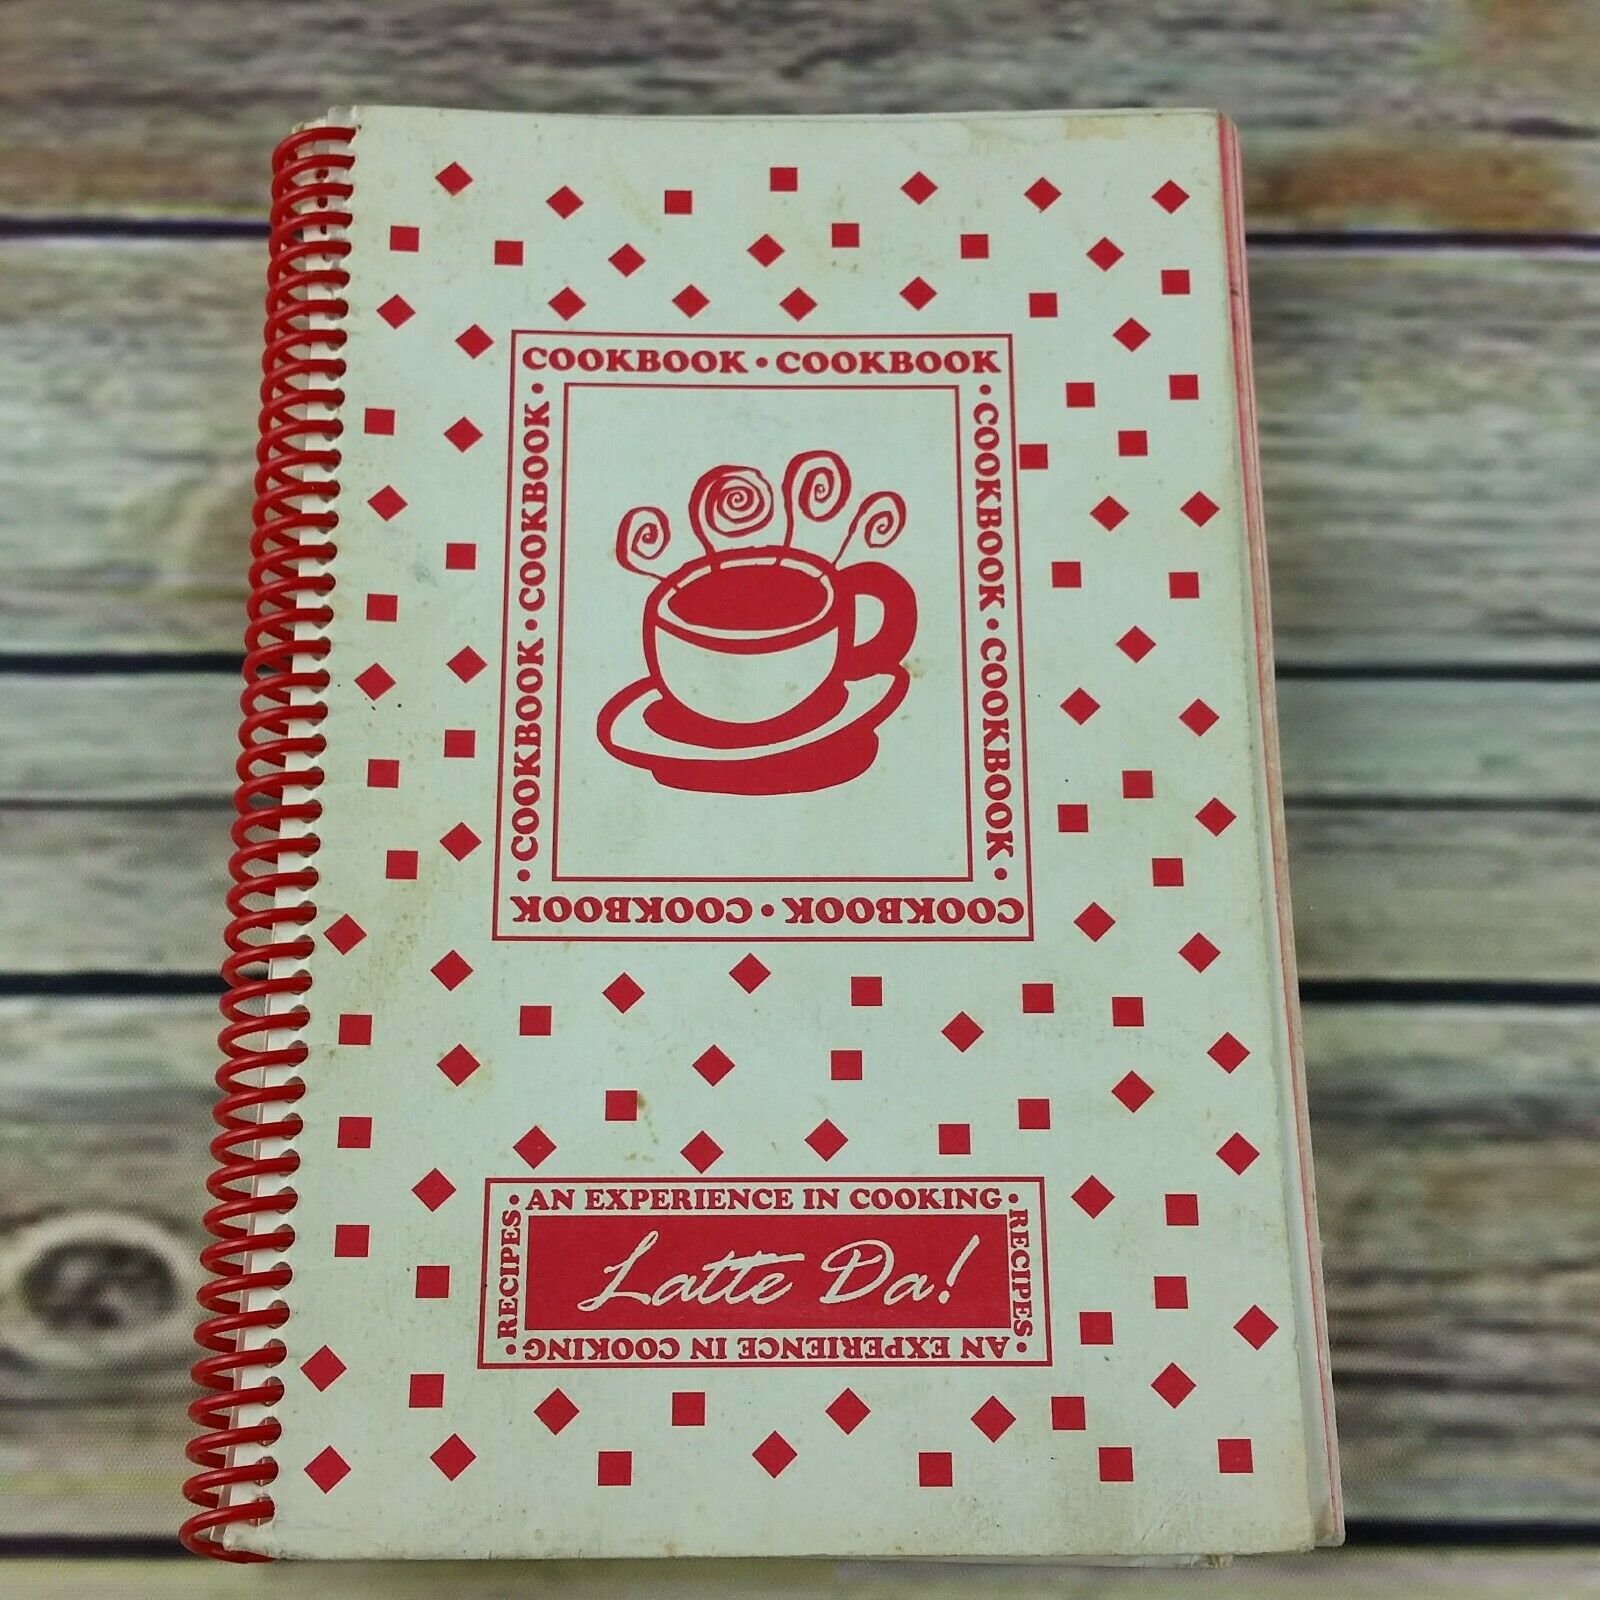 Vintage Cookbook Latte Da Cookbook An Experience in Cooking Recipes - At Grandma's Table